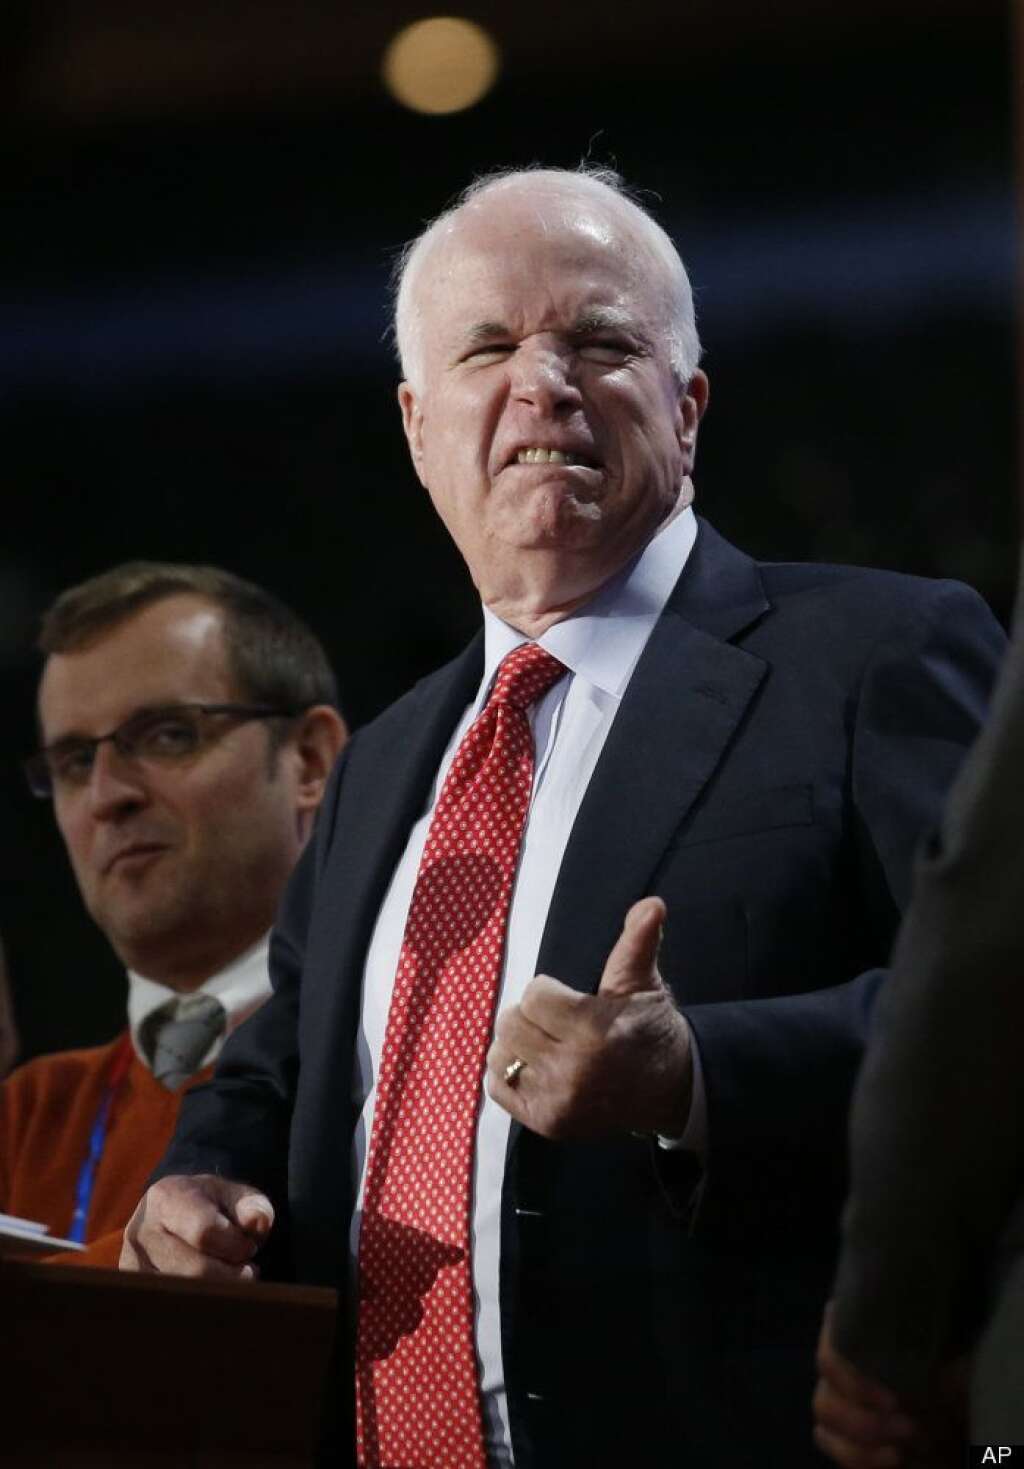 John McCain - Sen. John McCain clowns around on the podium during sound check the Republican National Convention in Tampa, Fla., on Wednesday, Aug. 29, 2012. (AP Photo/Jae C. Hong)